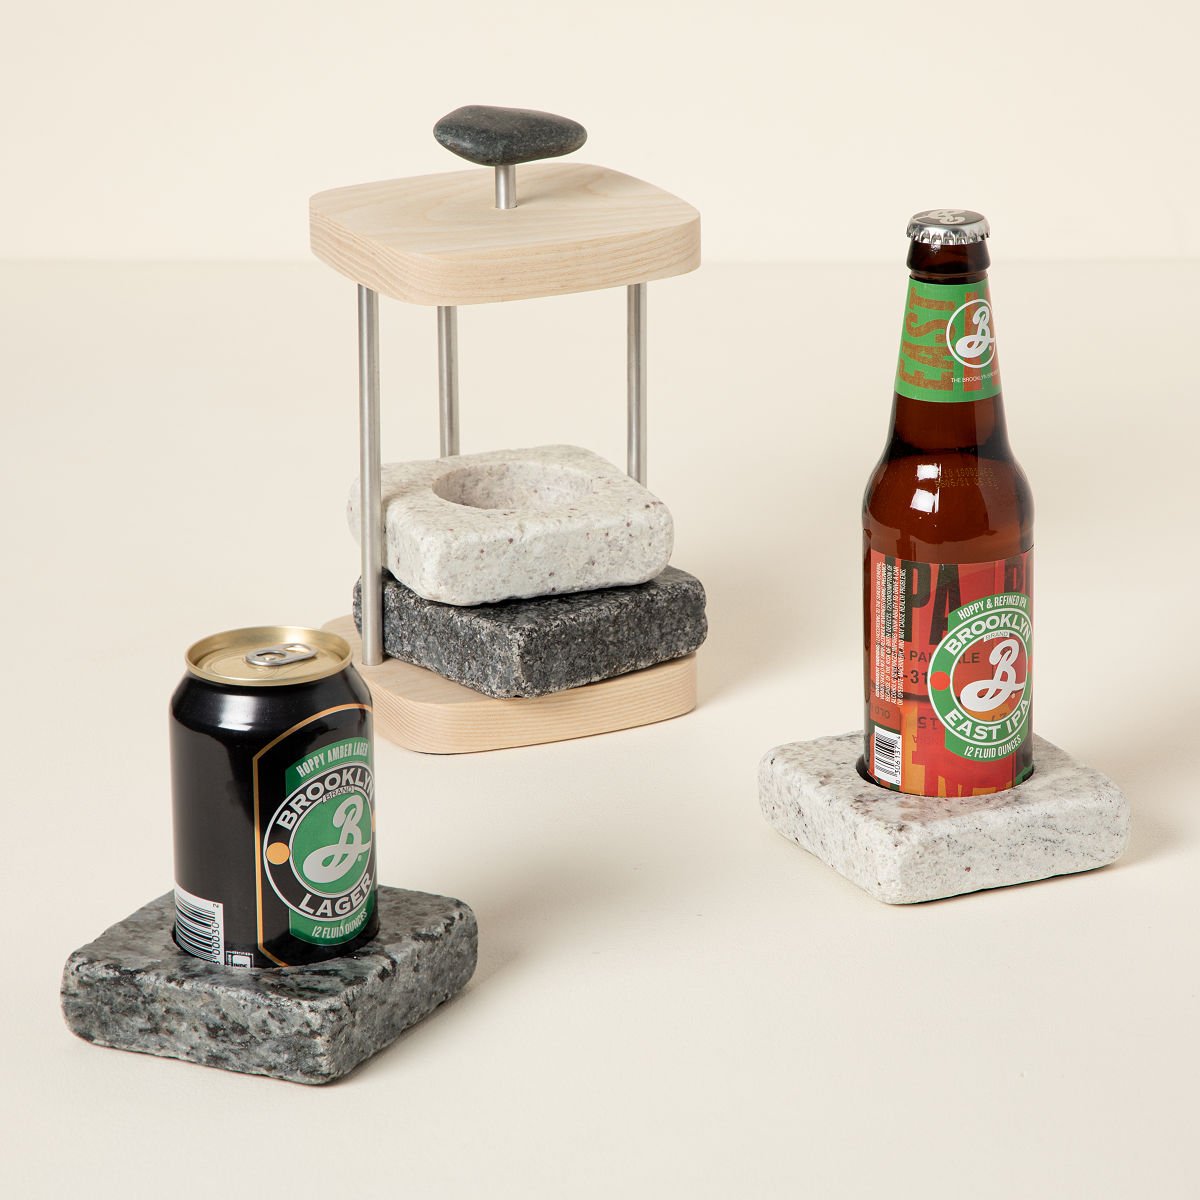 Craft beer chilling coasters